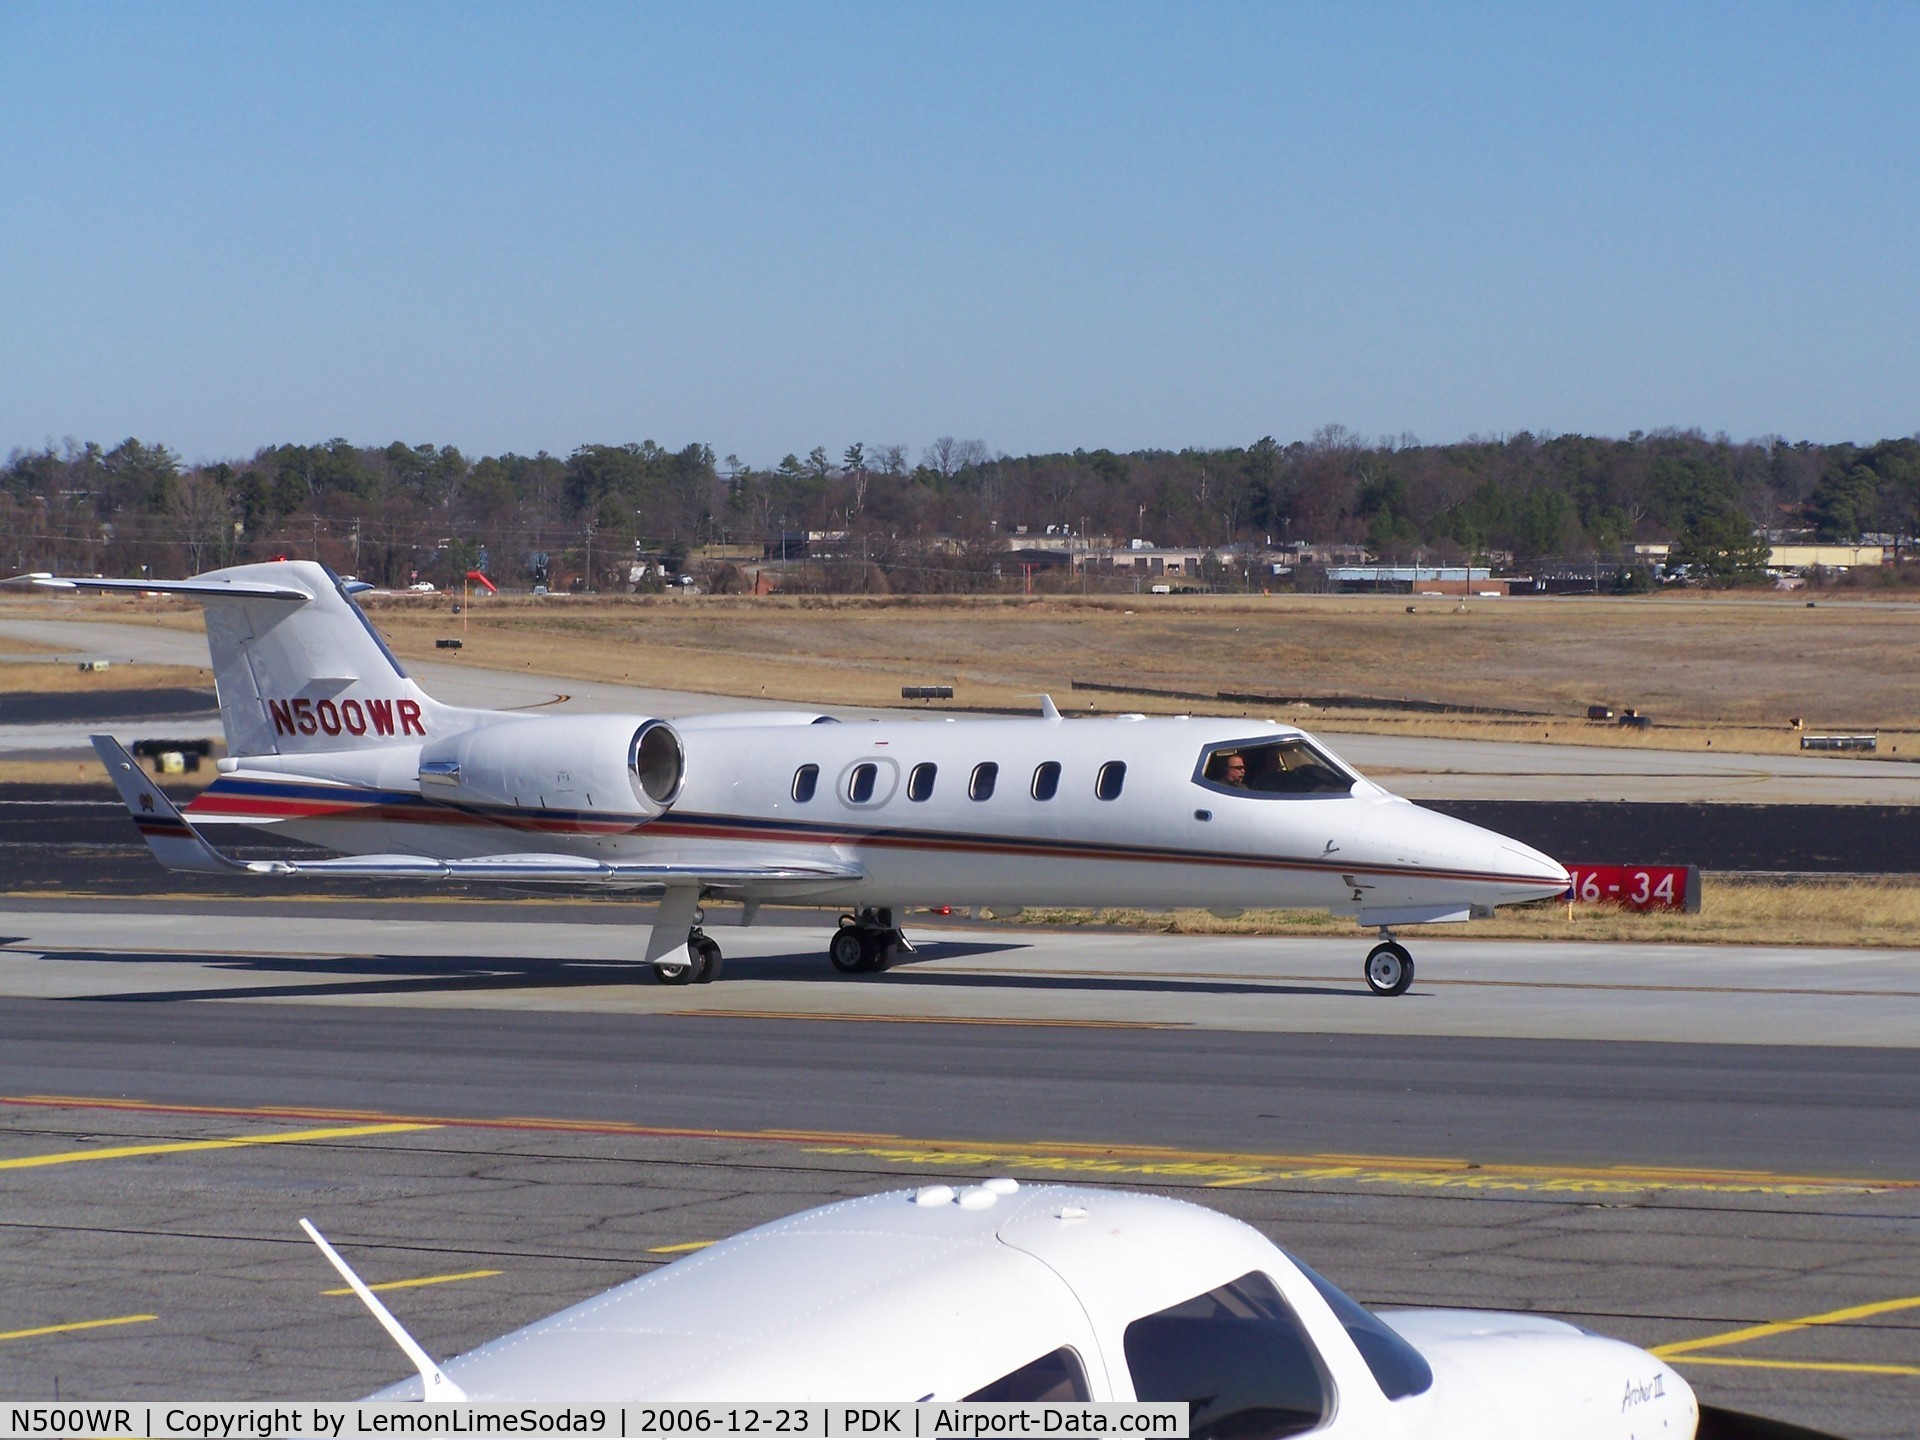 N500WR, 1991 Learjet 31A C/N 038, This was taken at PDK.